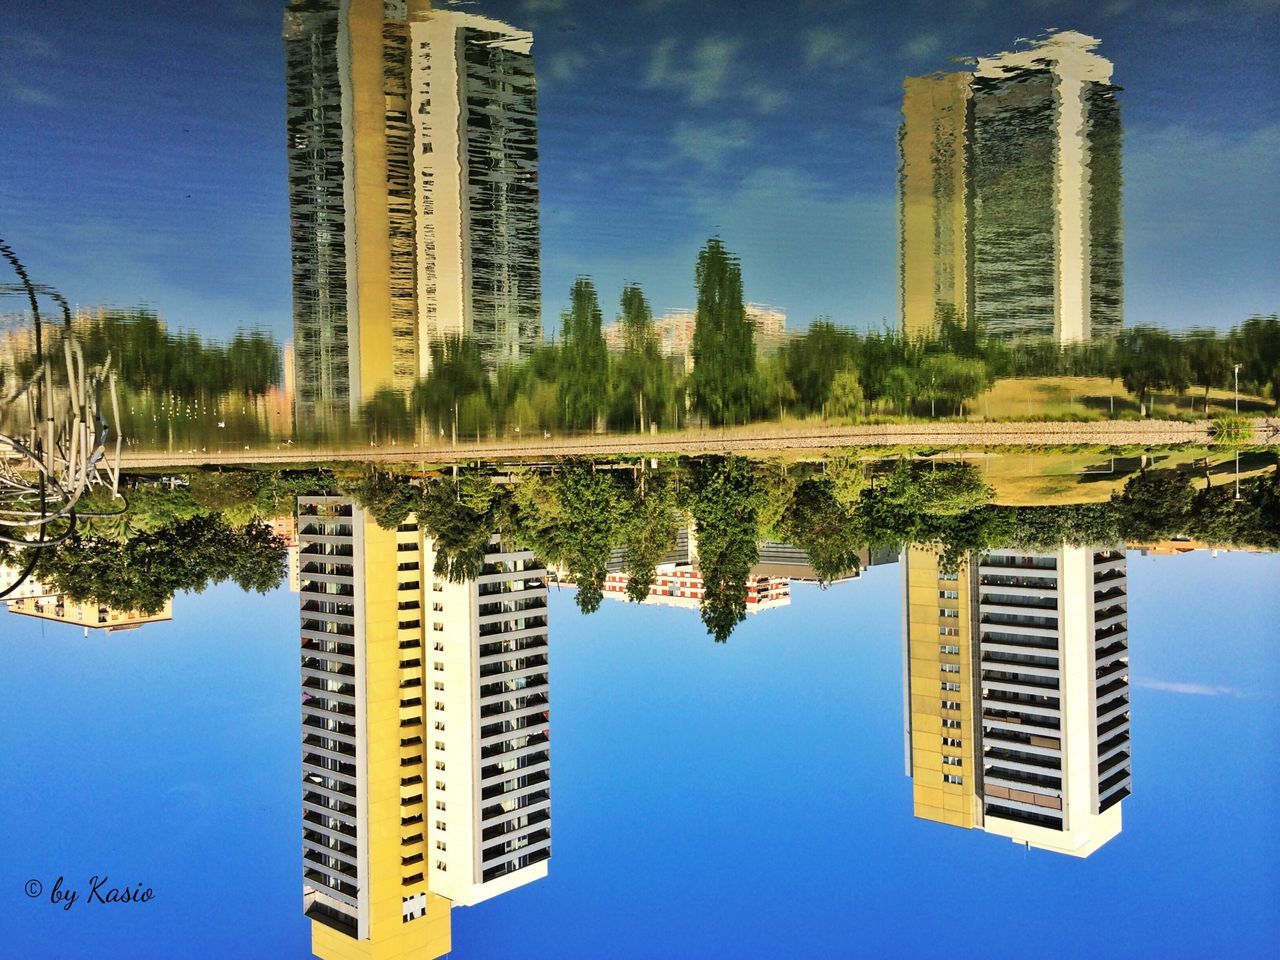 building exterior, architecture, blue, built structure, clear sky, reflection, skyscraper, tall - high, growth, tree, city, low angle view, modern, sky, tower, tall, day, no people, water, outdoors